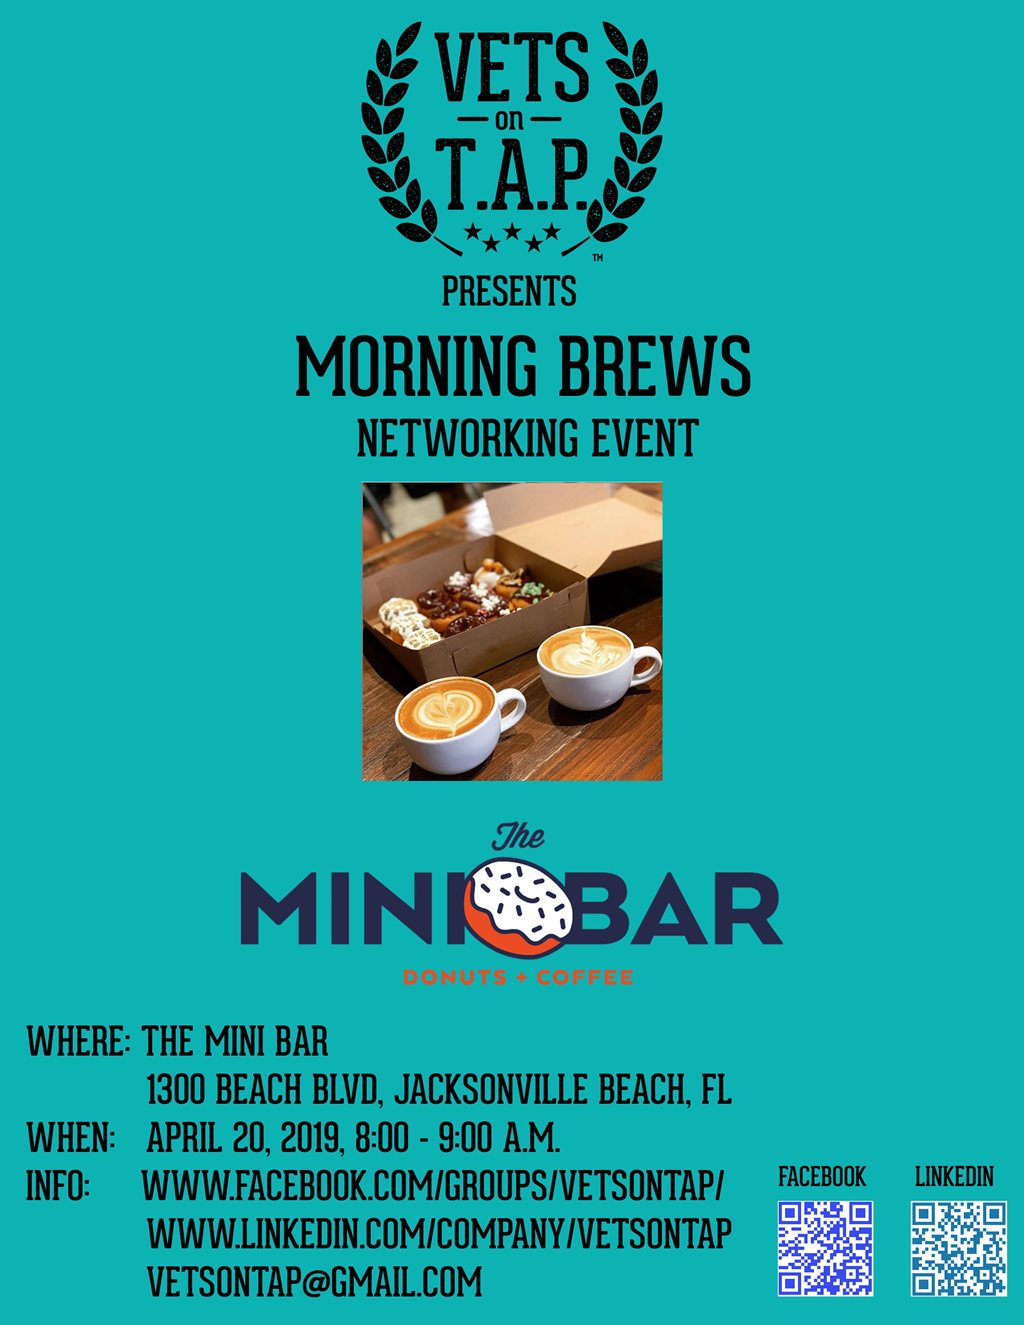 Vets on TAP presents a Morning Brews Networking Event at The Mini Bar.